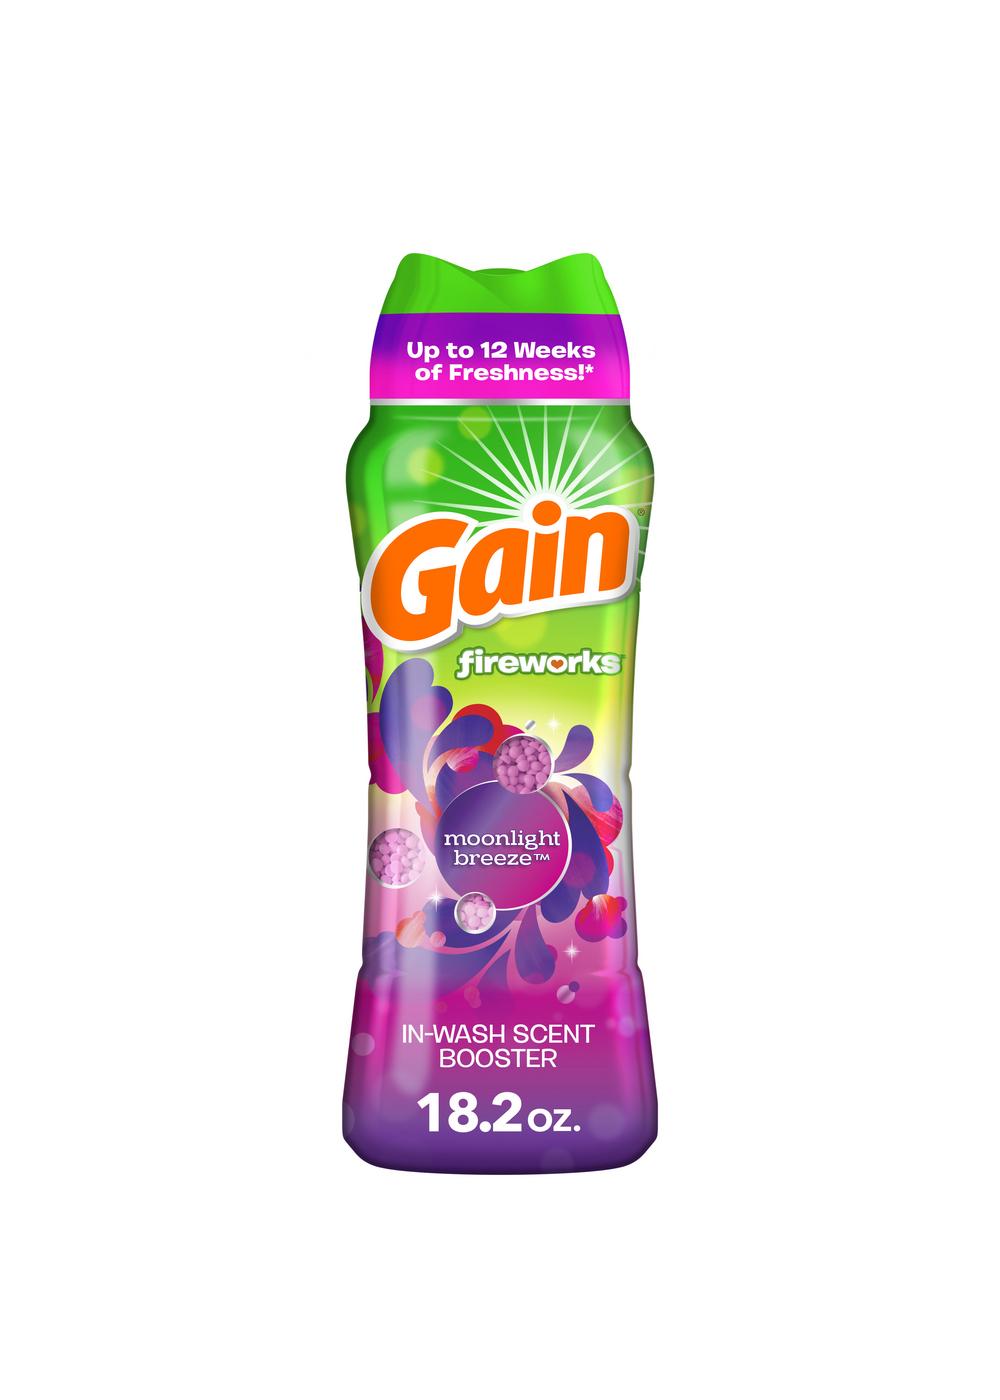 Gain Fireworks In-Wash Scent Booster - Moonlight Breeze; image 1 of 5